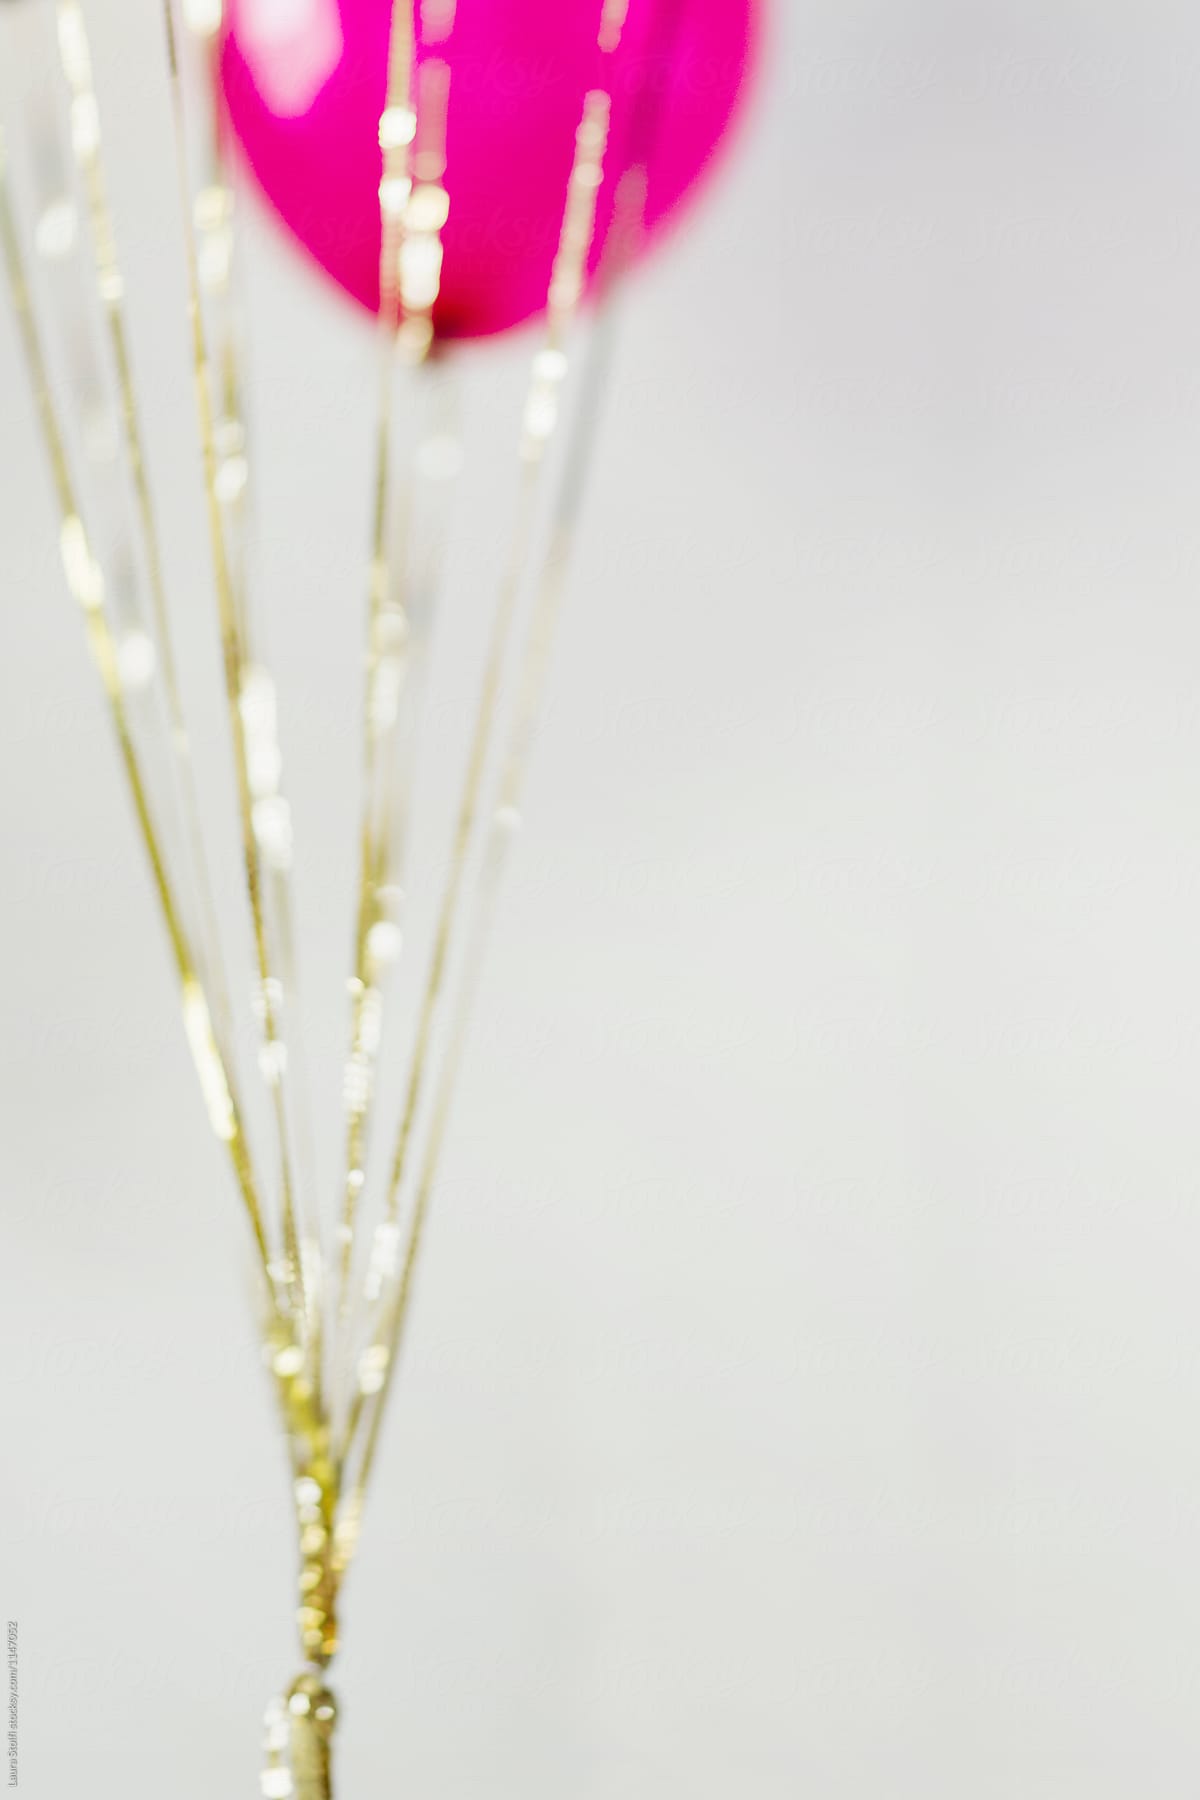 Blurry Gold Sequin Strings Hanging From Balloons by Stocksy